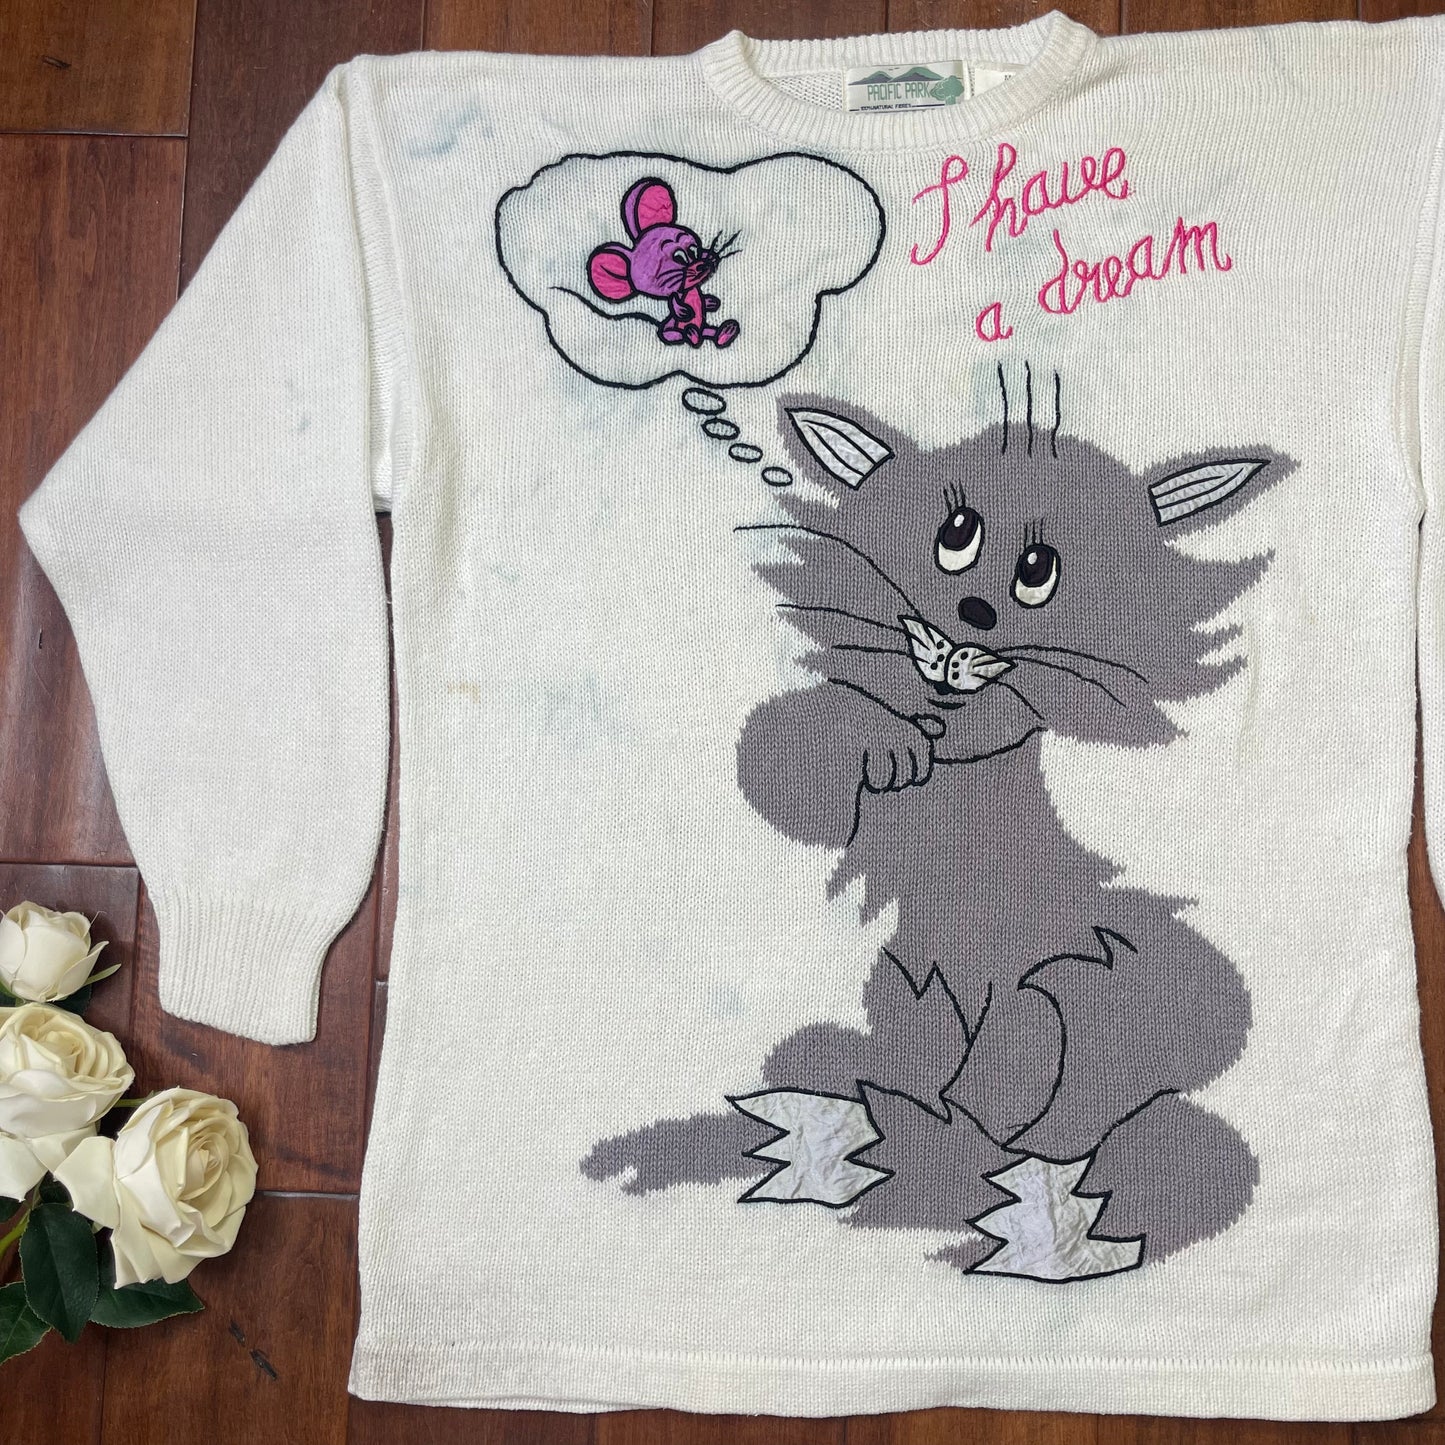 VINTAGE “I HAVE A DREAM” KITTY KNIT SWEATER